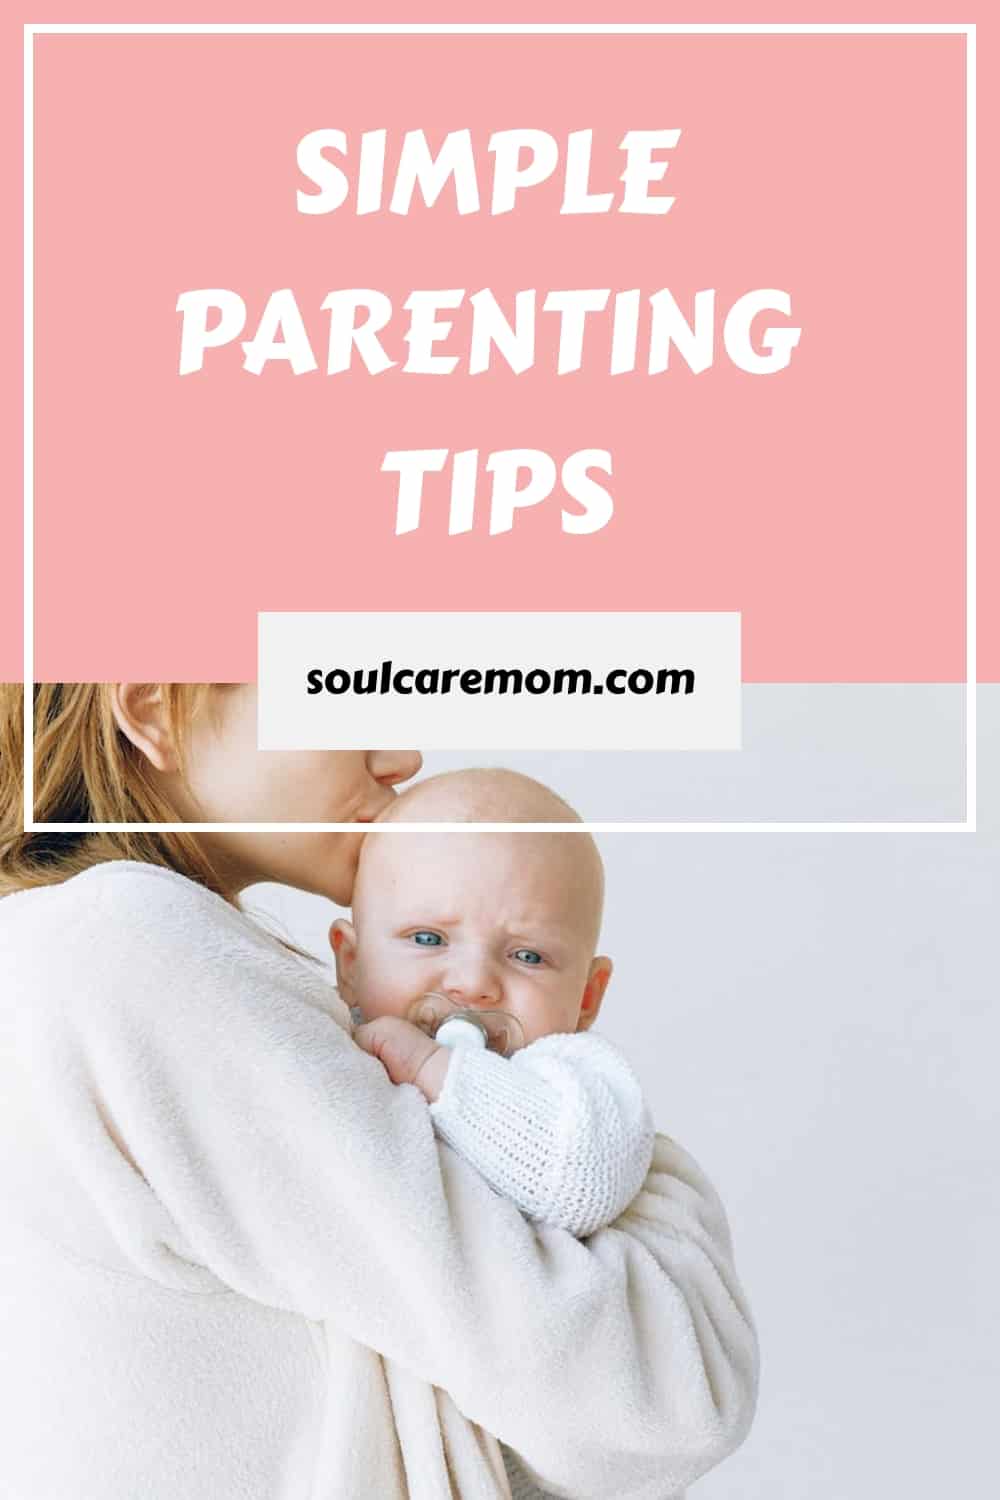 Mother Holding Her Infant Child - Simple Parenting Tips to help you find more ease as a mom